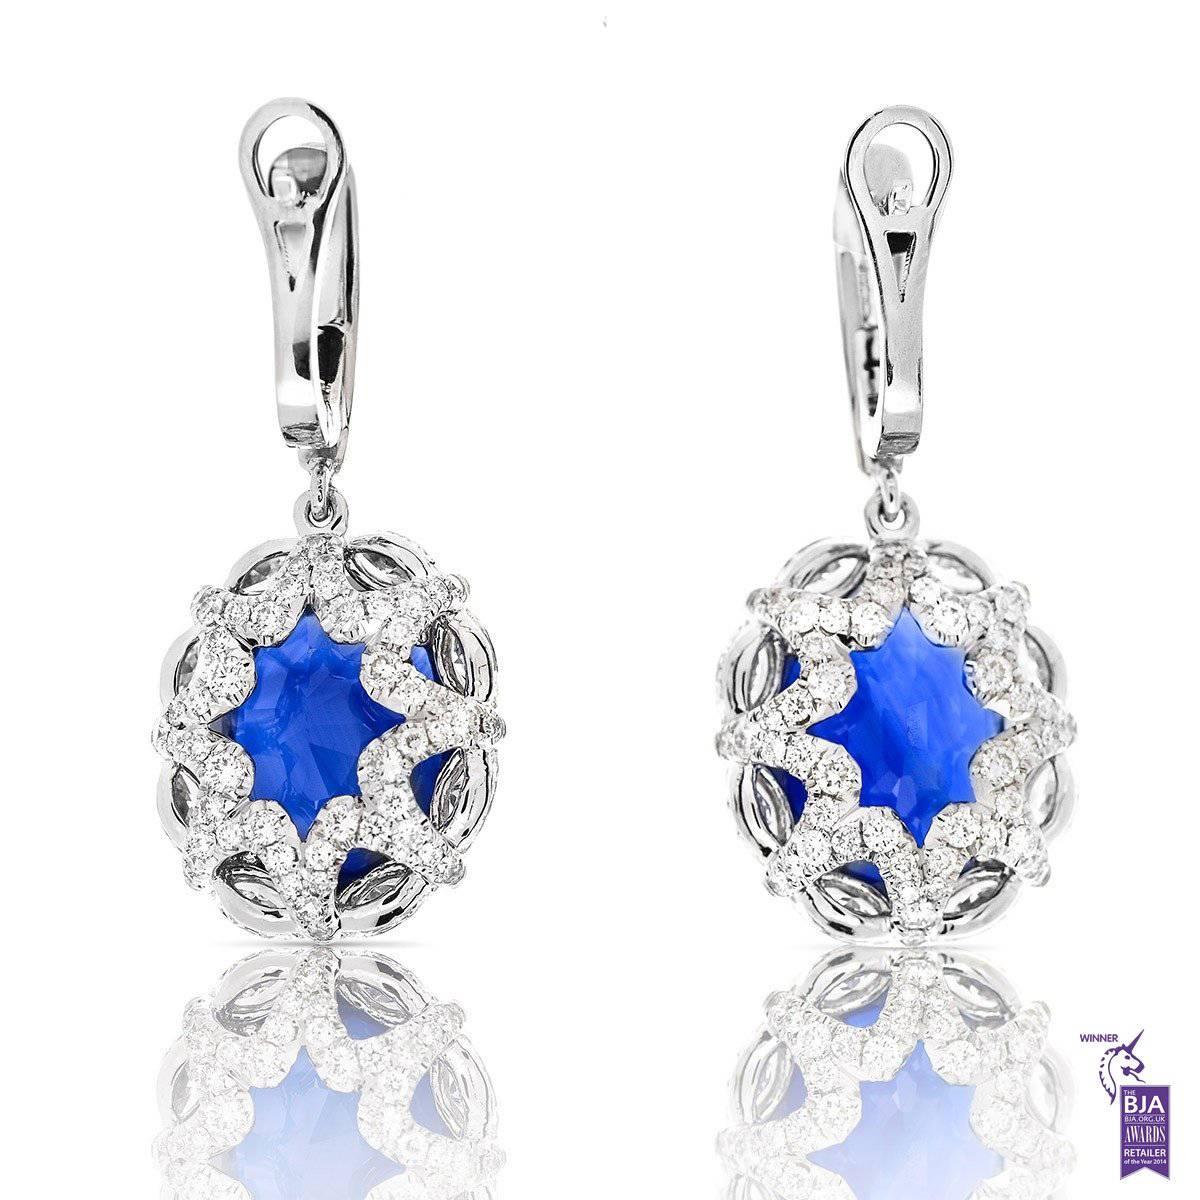 NATURAL SRI-LANKA SAPPHIRE DROP EARRINGS - 28.31 CT

Set in 18Kt White gold


Total sapphire weight: 24.70 ct
[ 2 stones ]
Color: Blue
Origin: Sri Lanka

Total marquise cut diamond weight: 2.45 ct
[ 16 diamonds ]
Color: G-H
Clarity: VS

Total round